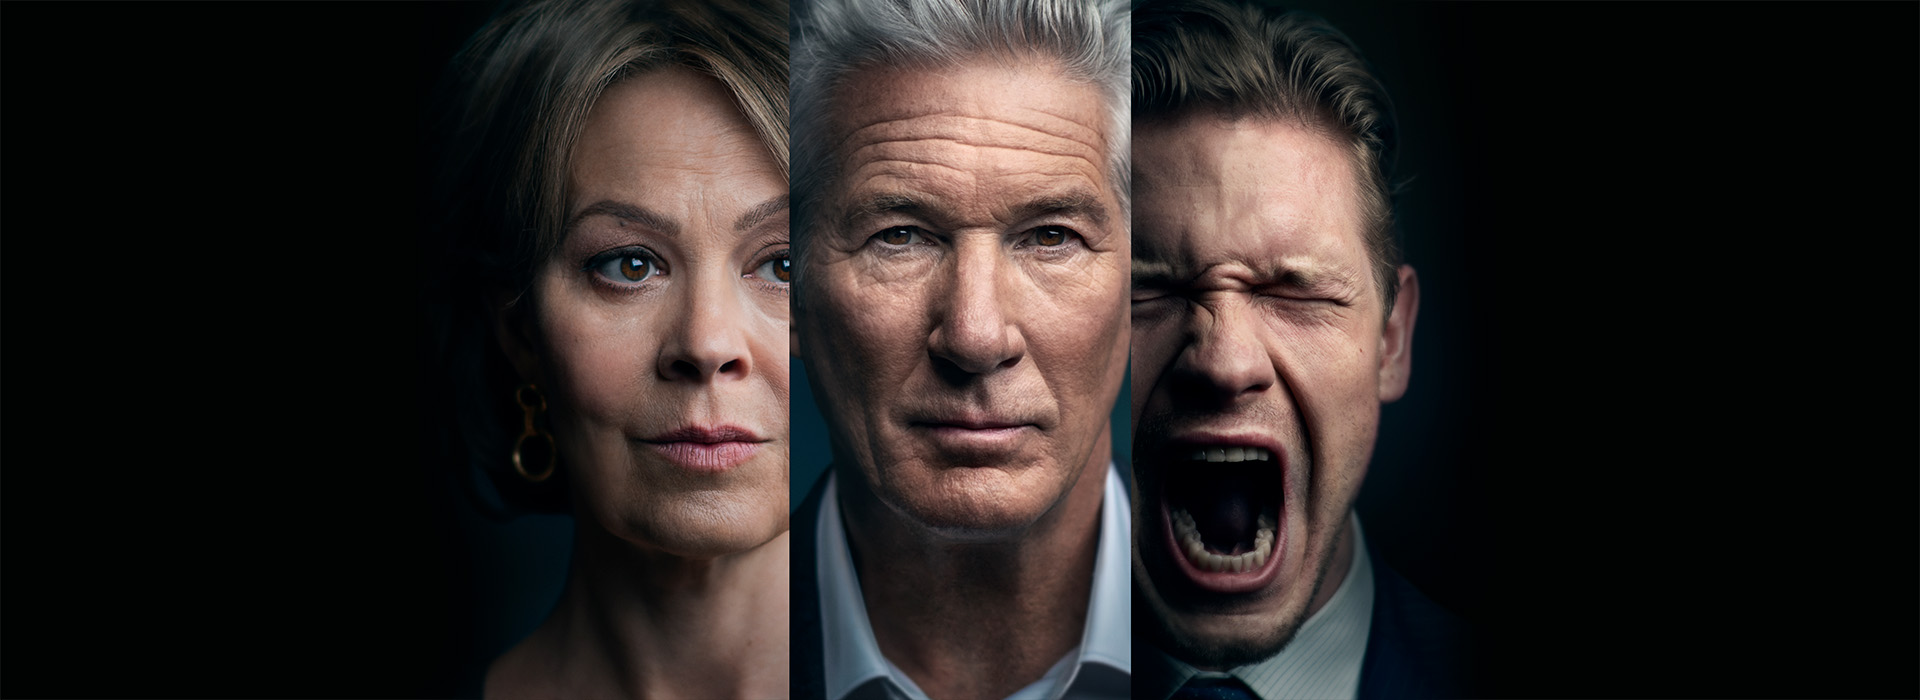 Series poster MotherFatherSon